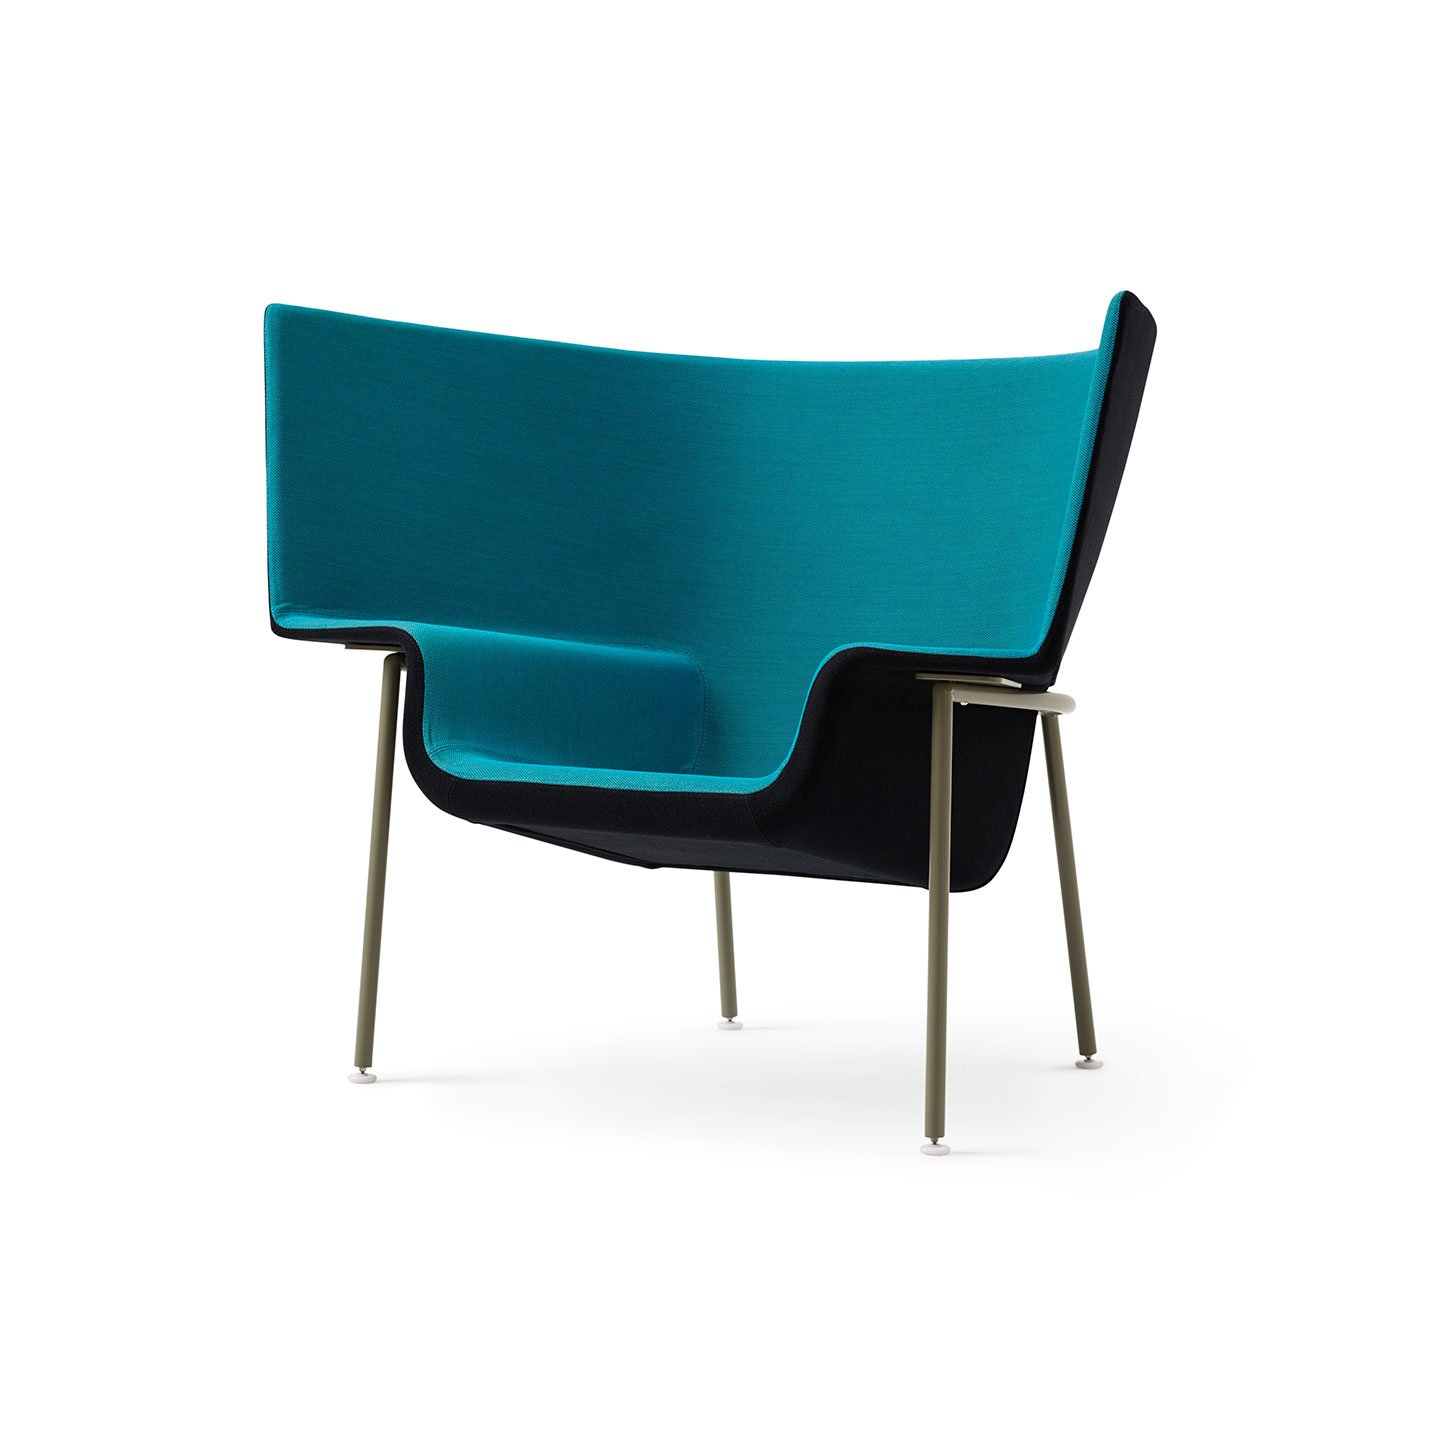 Haworth Capo lounge chair in black and teal color offering visual privacy